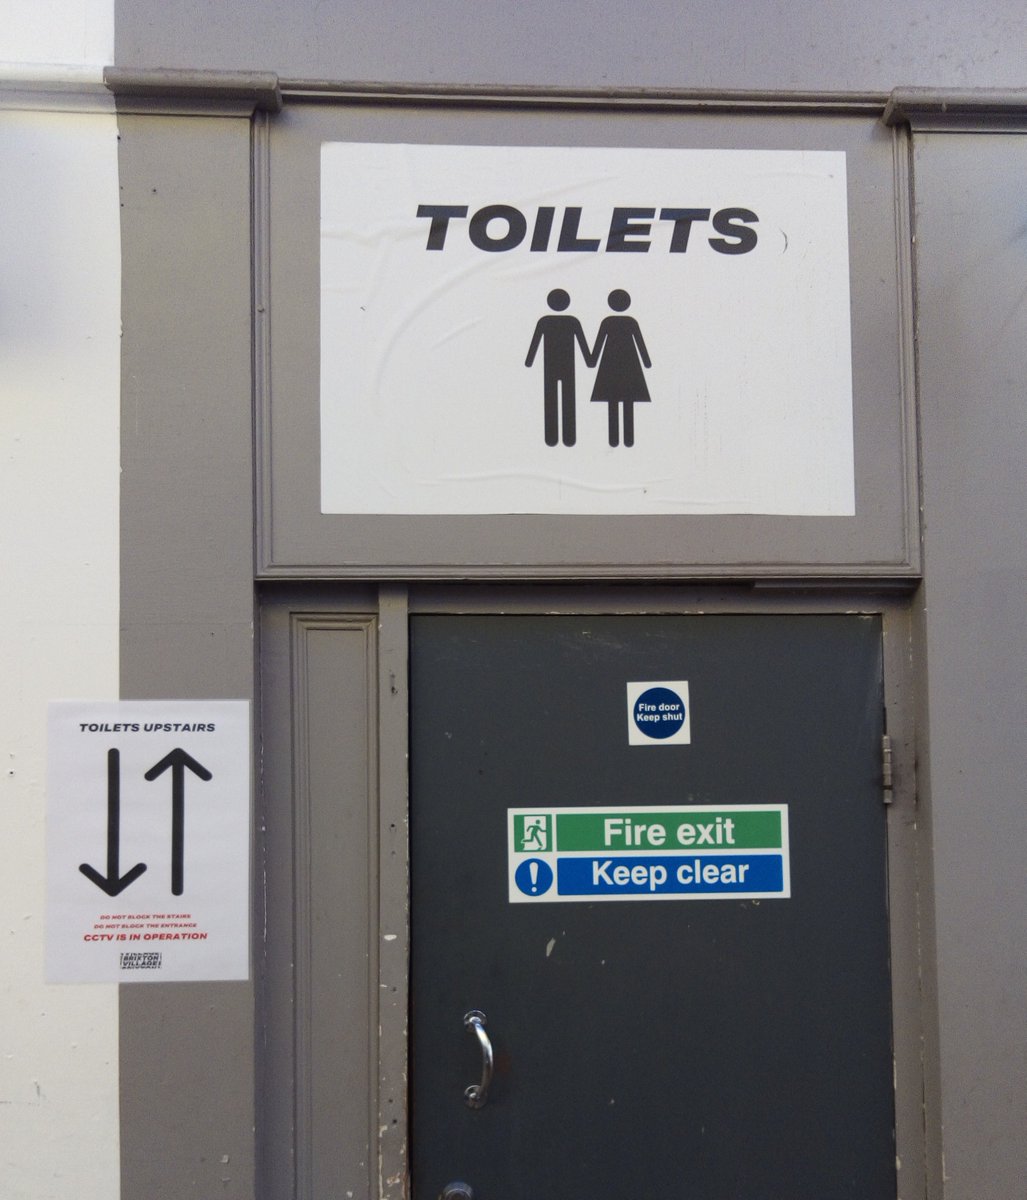 As these toilets are located upstairs, please put up information about where we can find the nearest step-free toilet     #incLOOsion    @BrixtonVillage @InclusionLondon